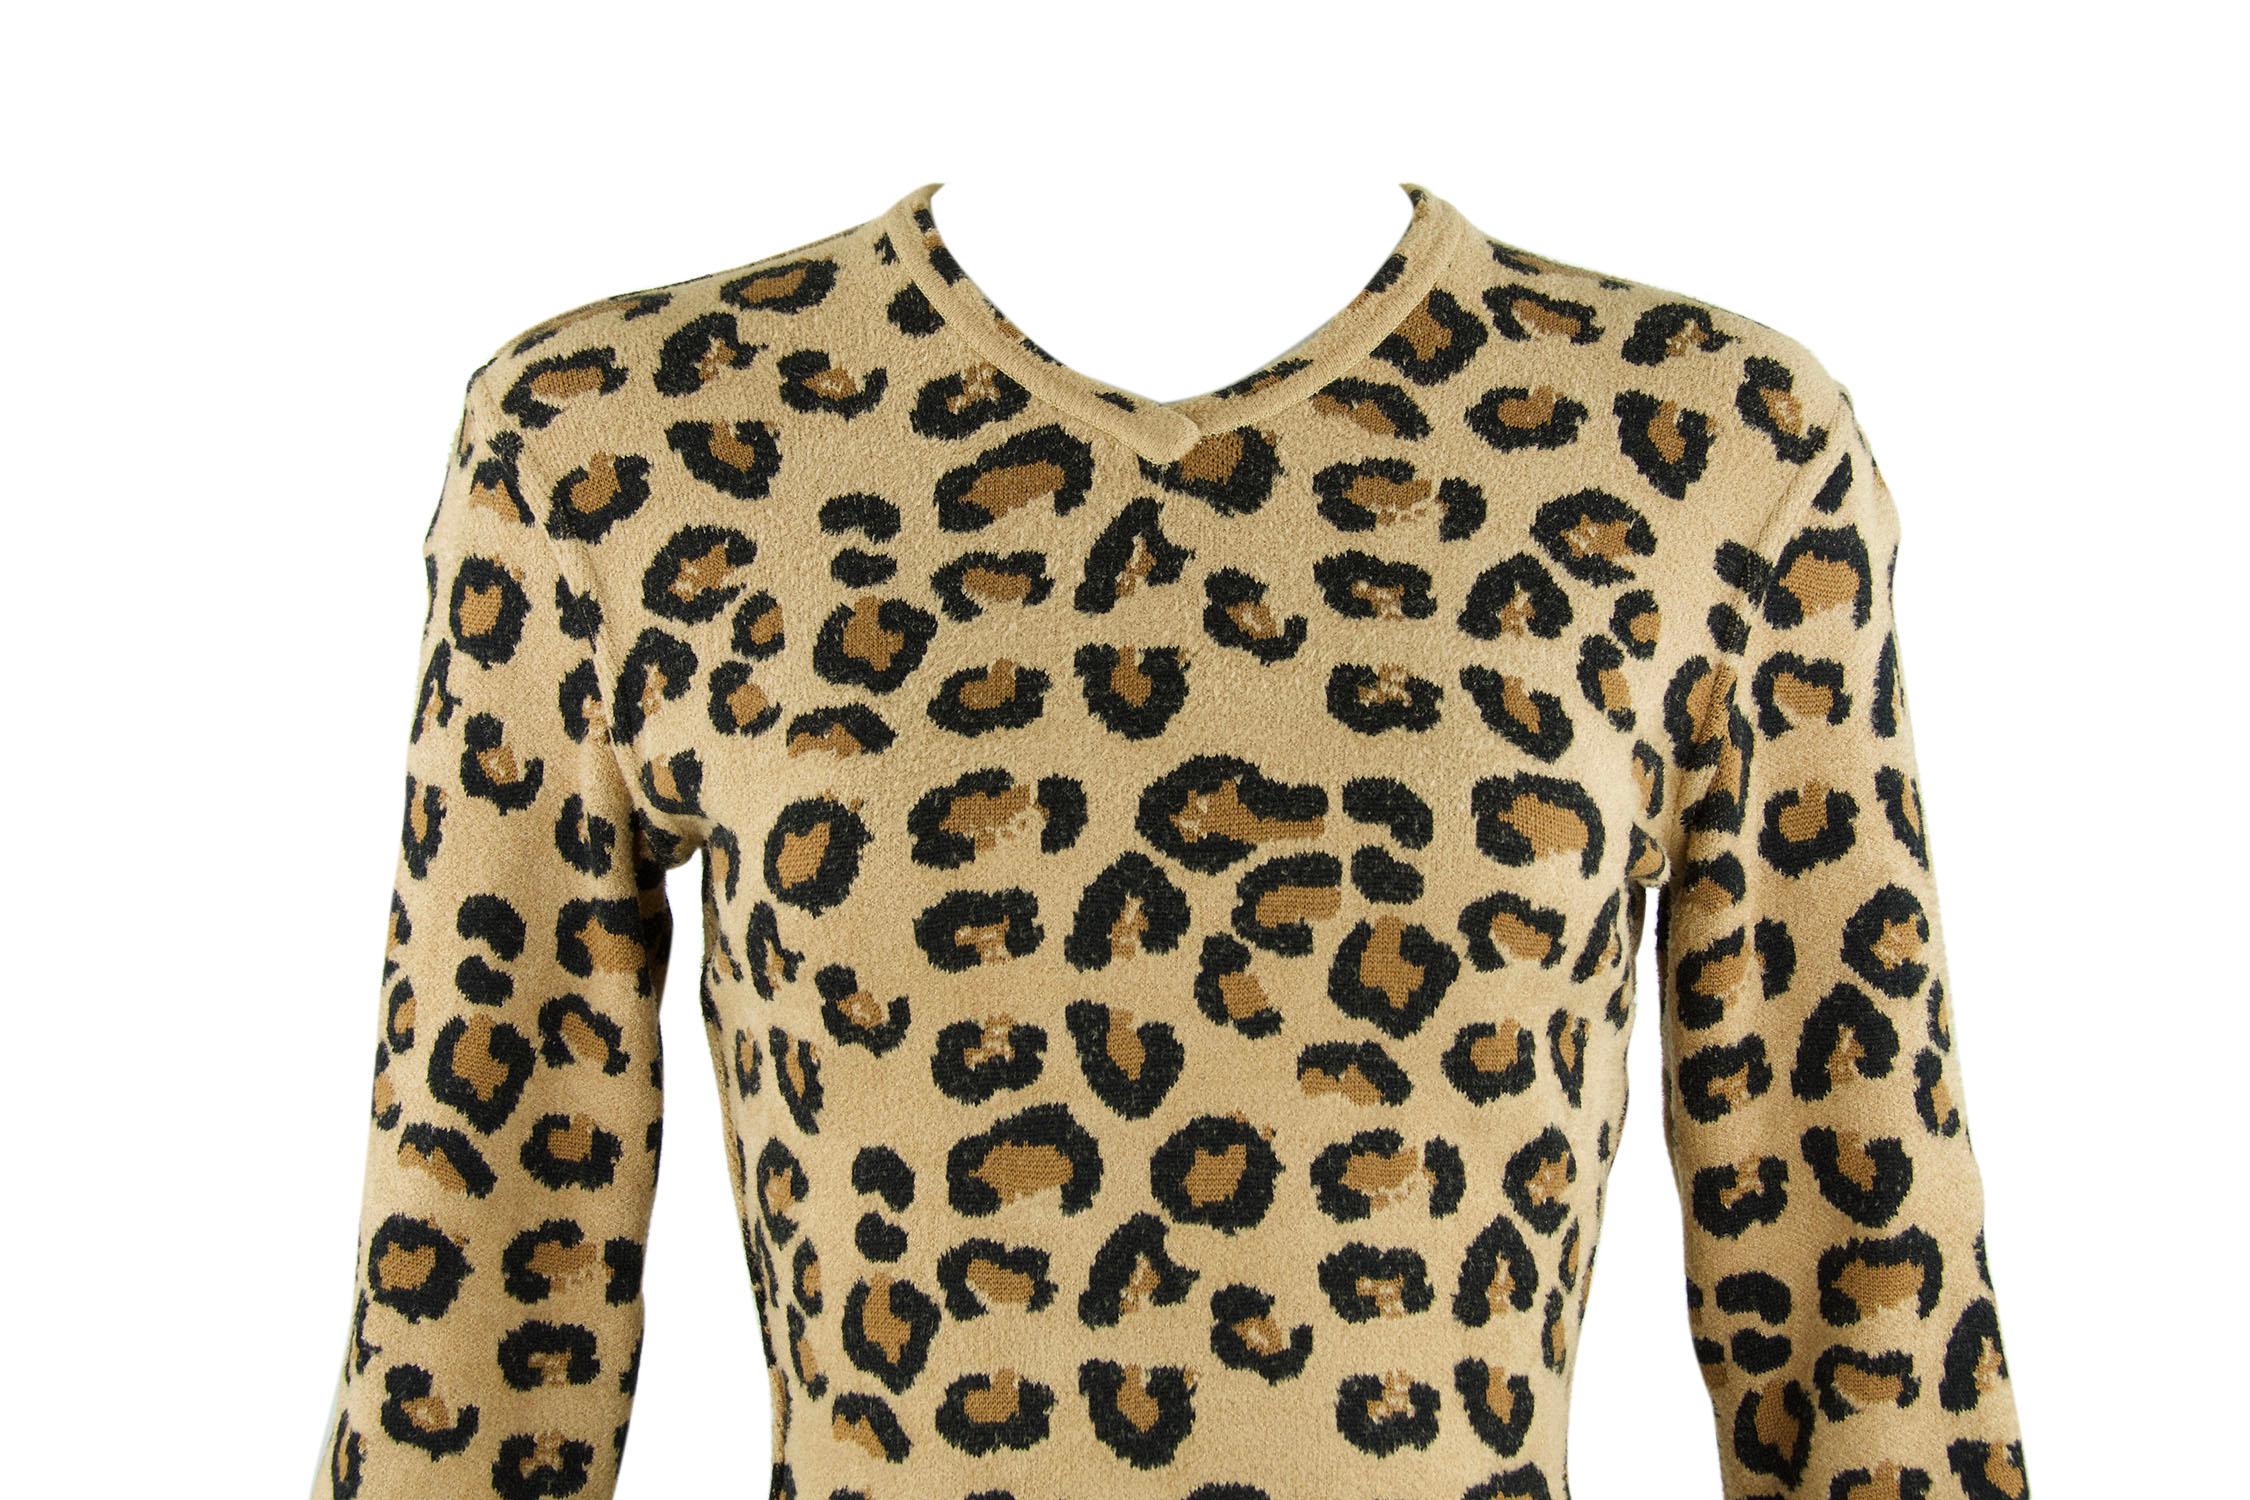 Alaia Vintage Leopard V Neck Dress 1991 - Size S In Excellent Condition For Sale In Newport, RI